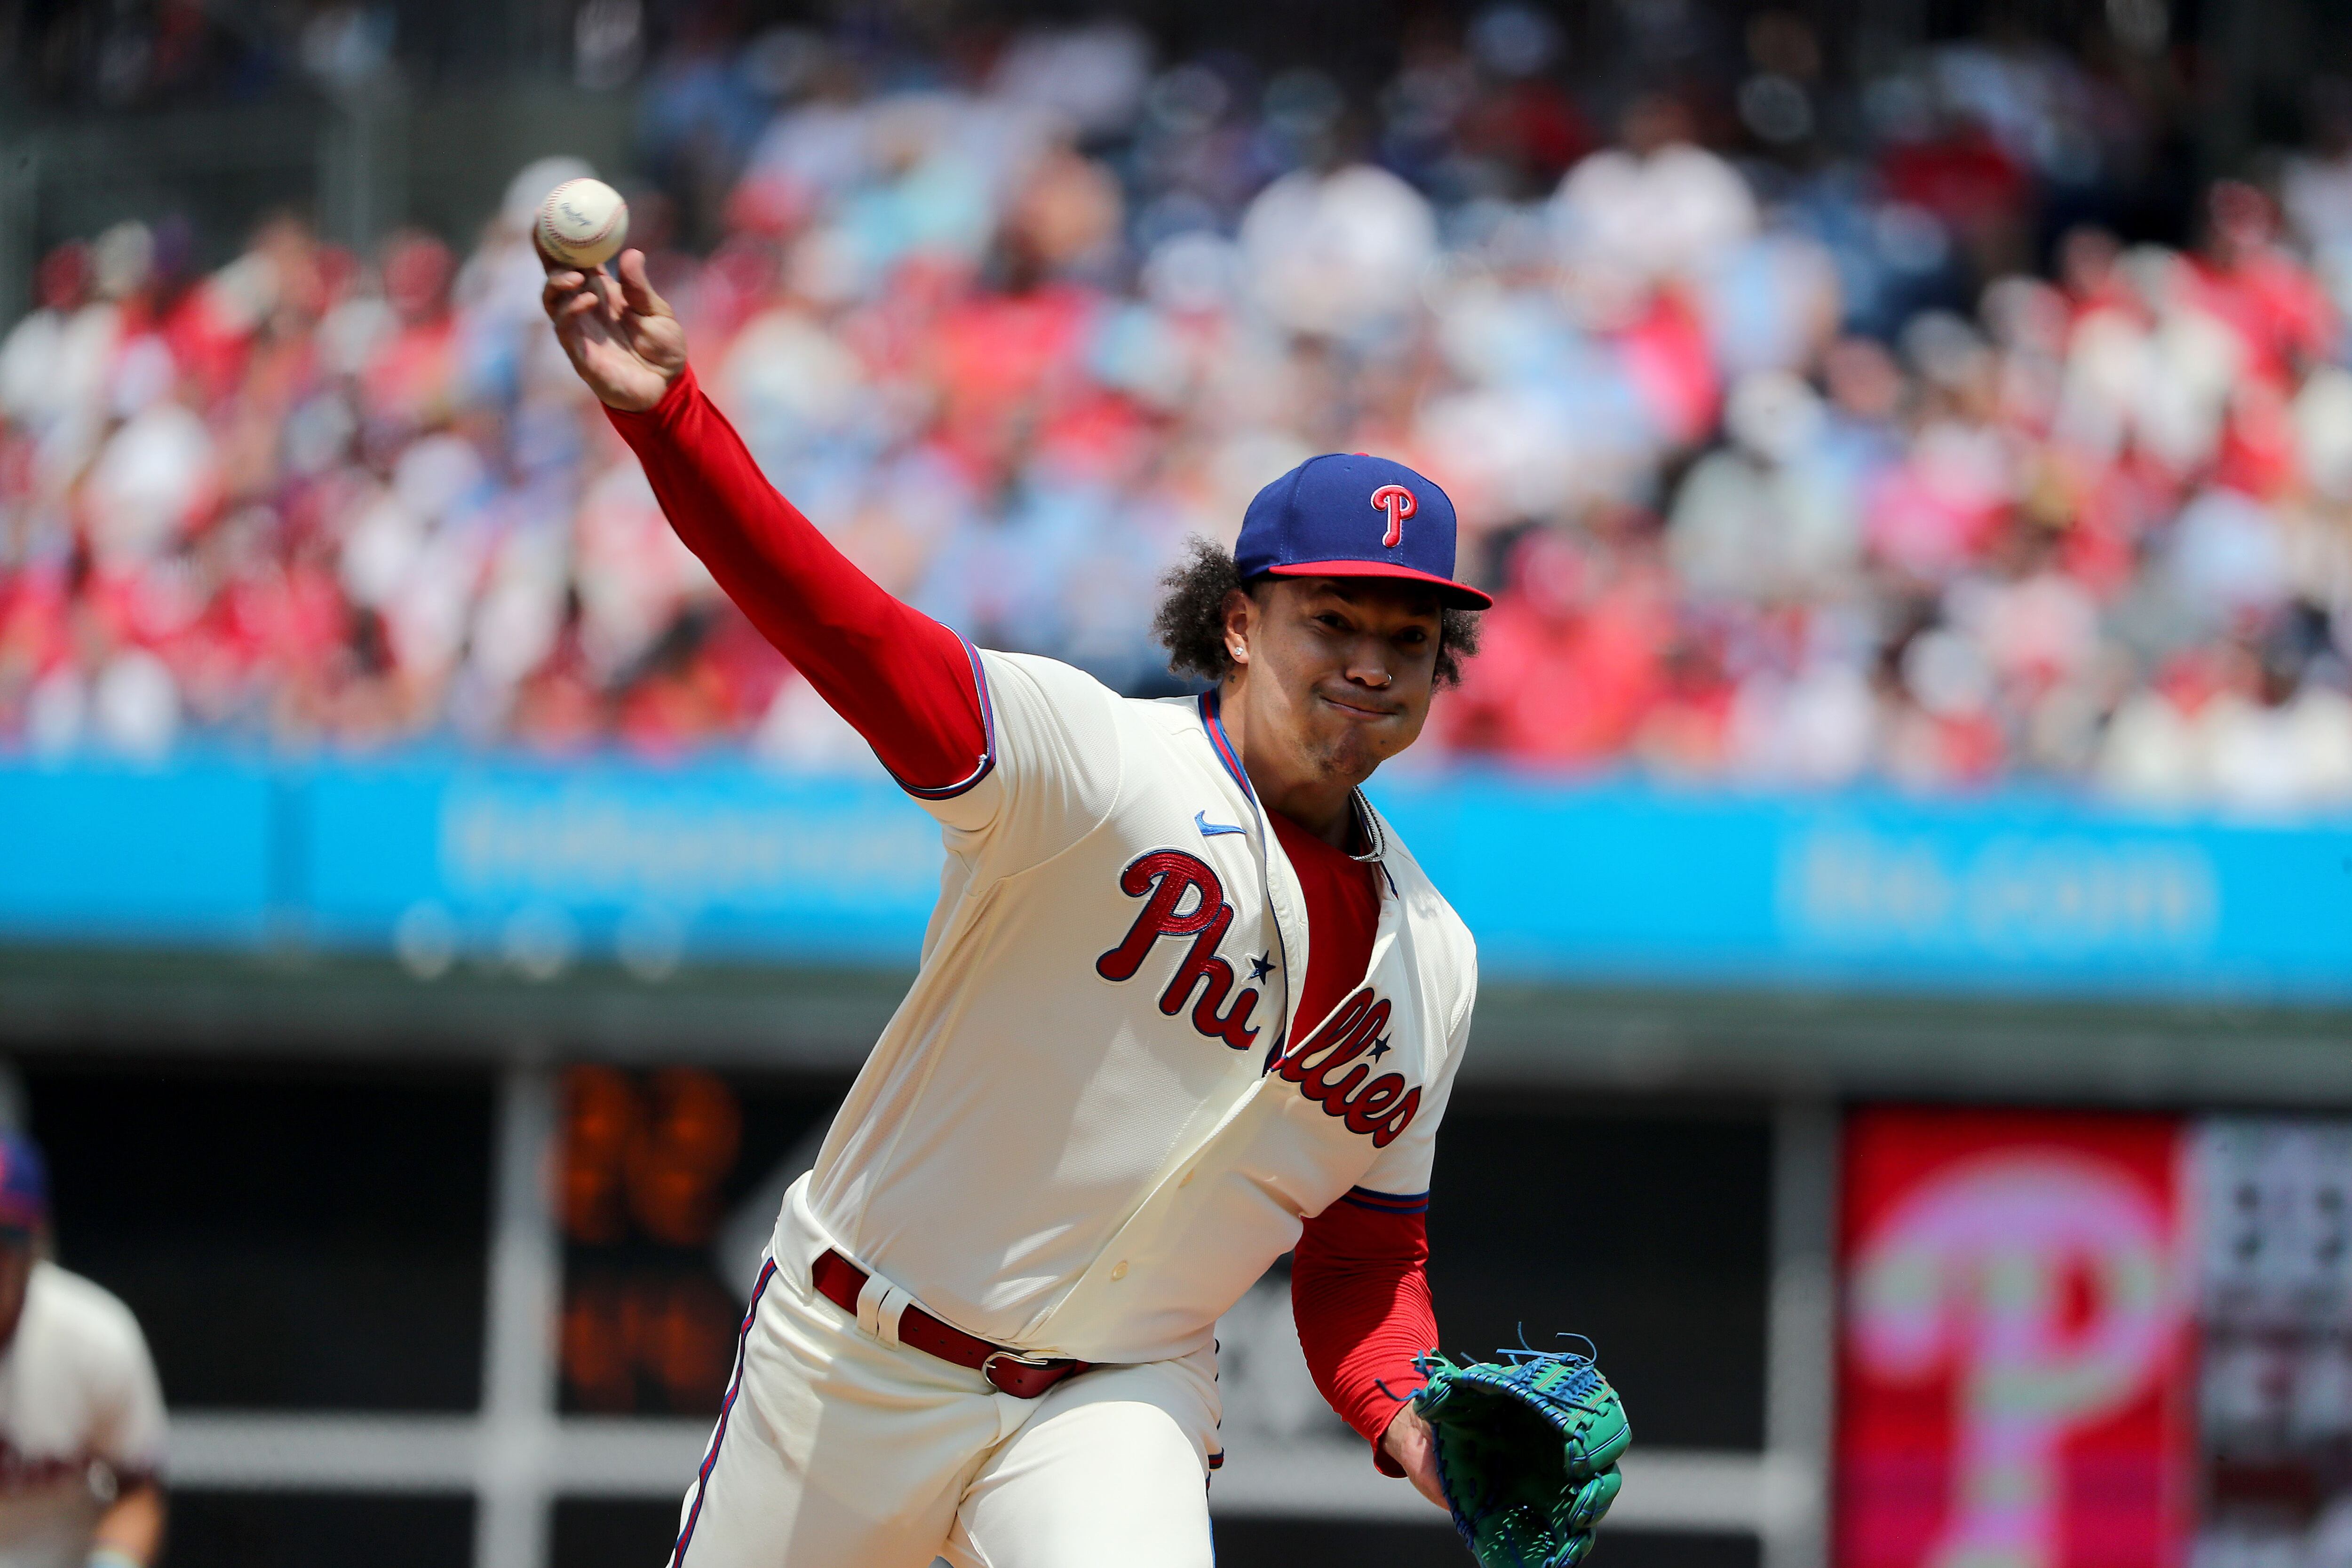 ⚾ Stott, Schwarber and Castellanos homer to help Phillies down Royals